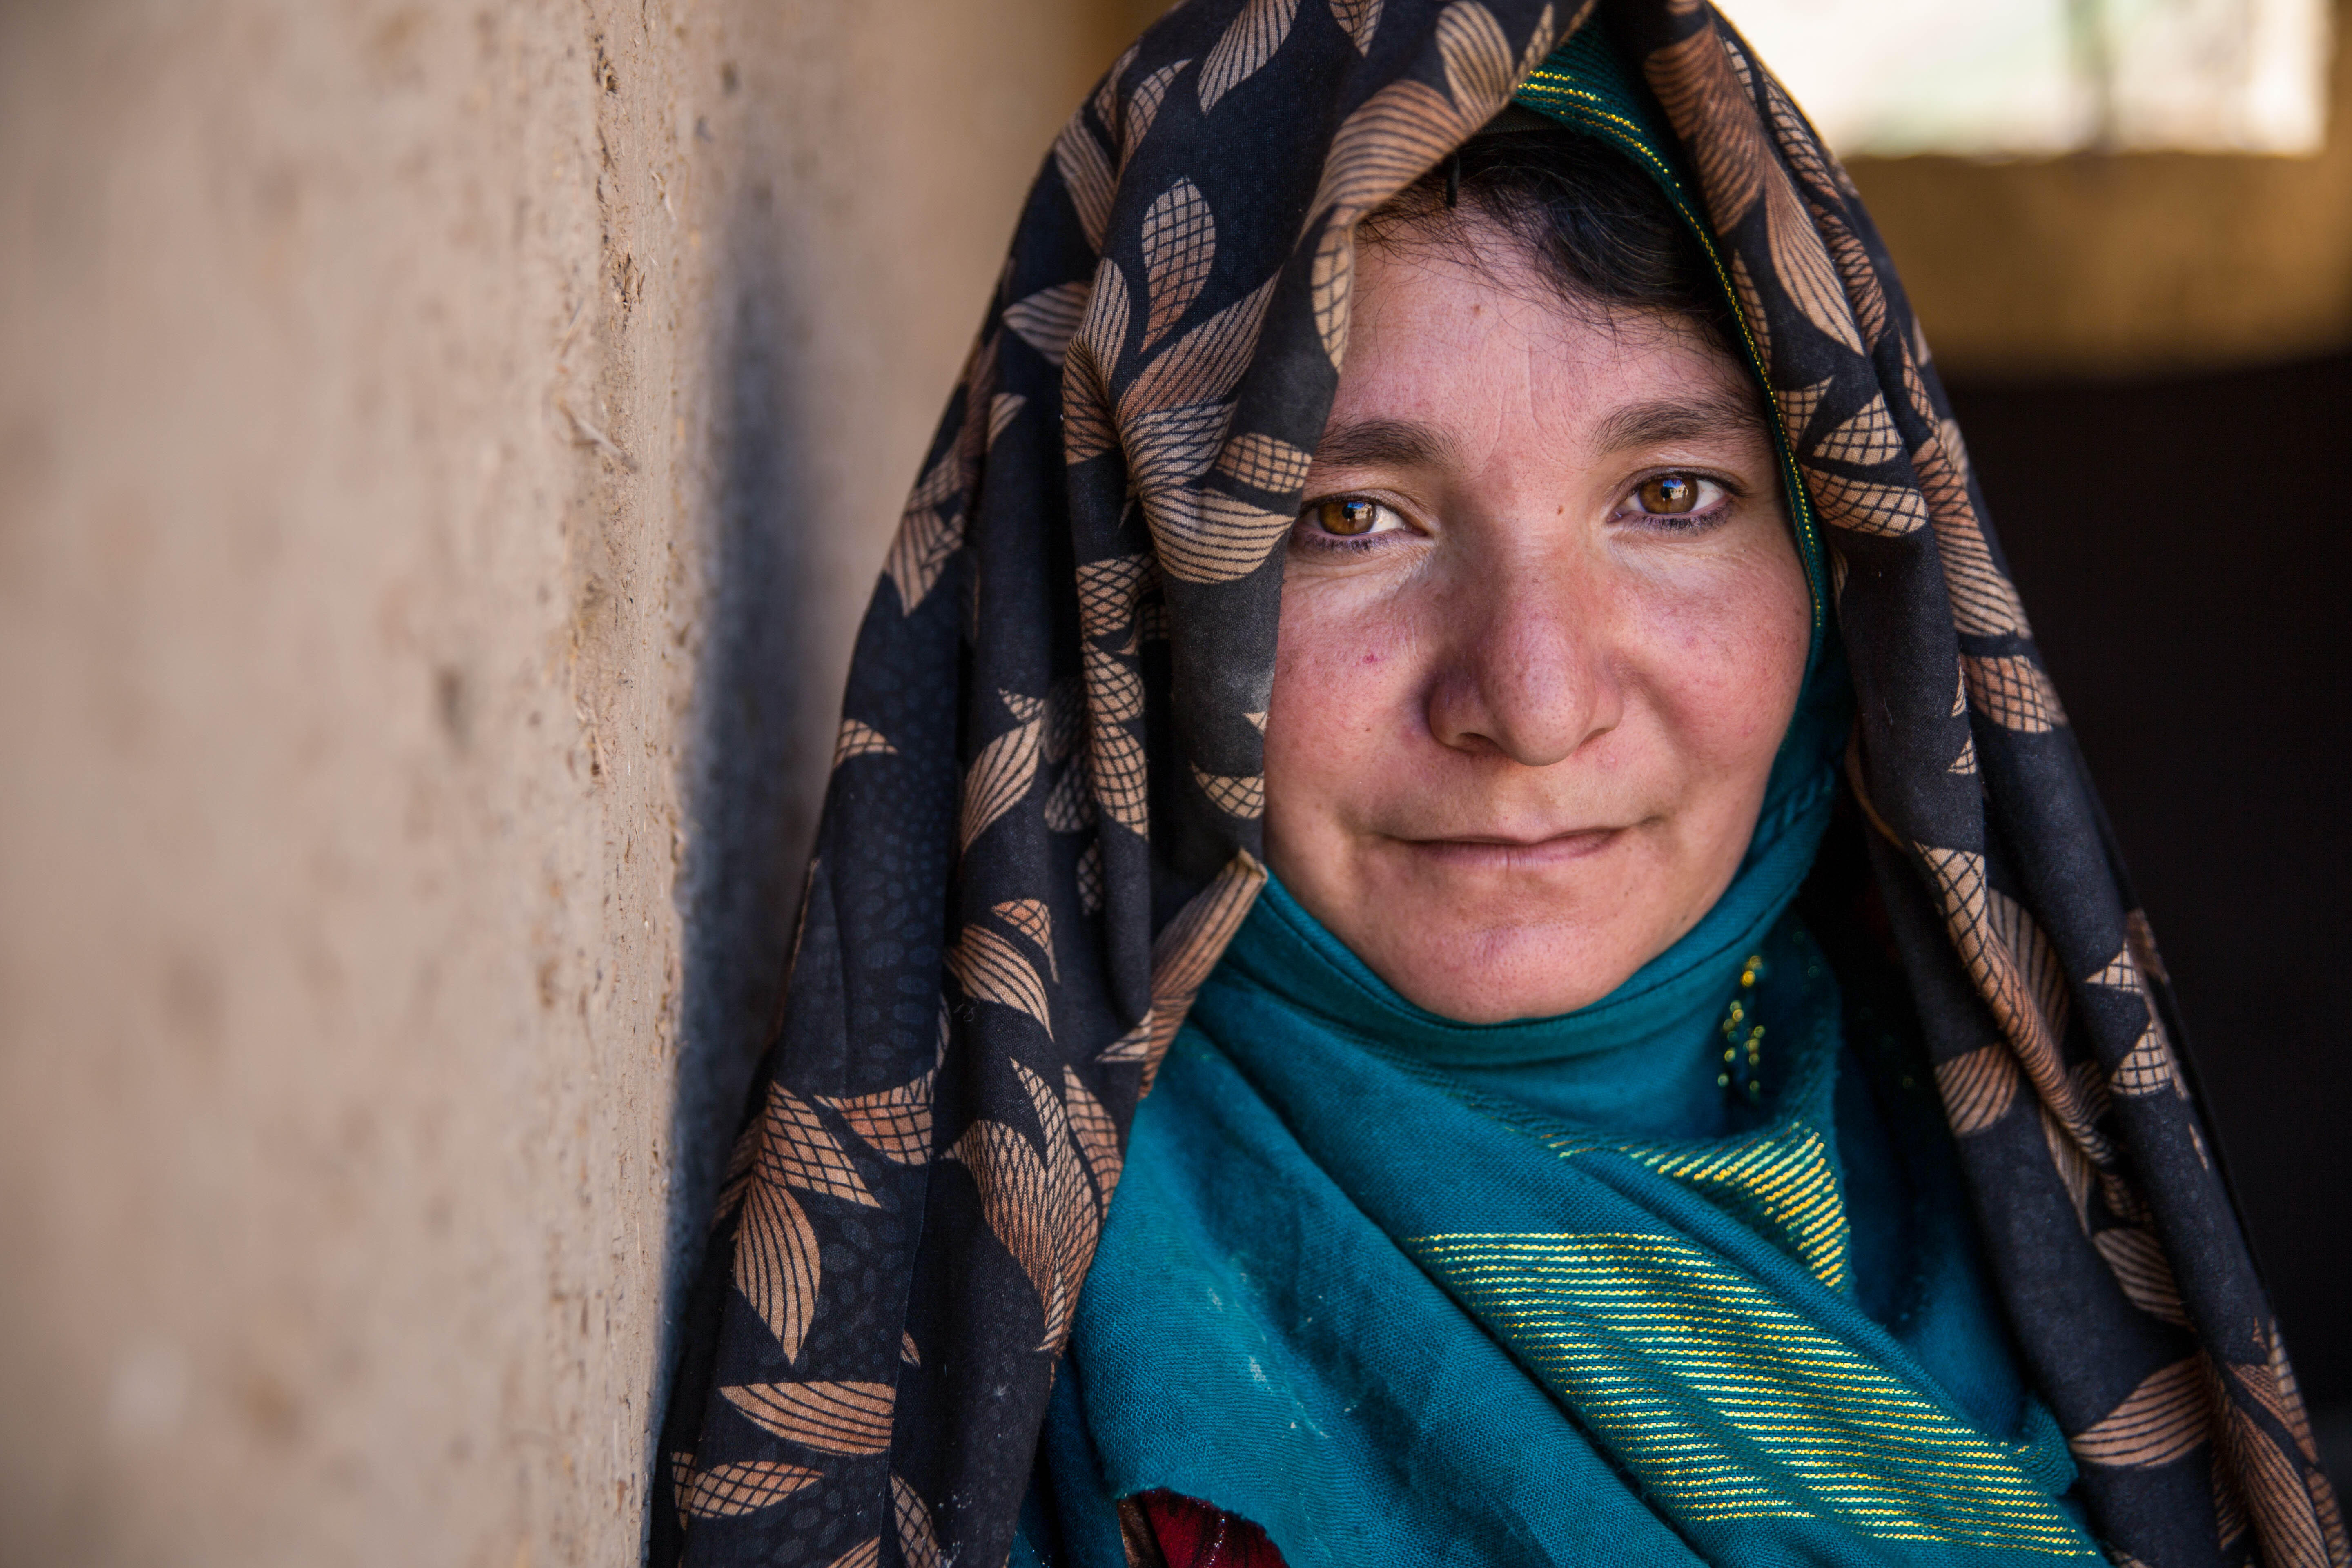 An Afghan woman looks at the camera while standing against a wall 